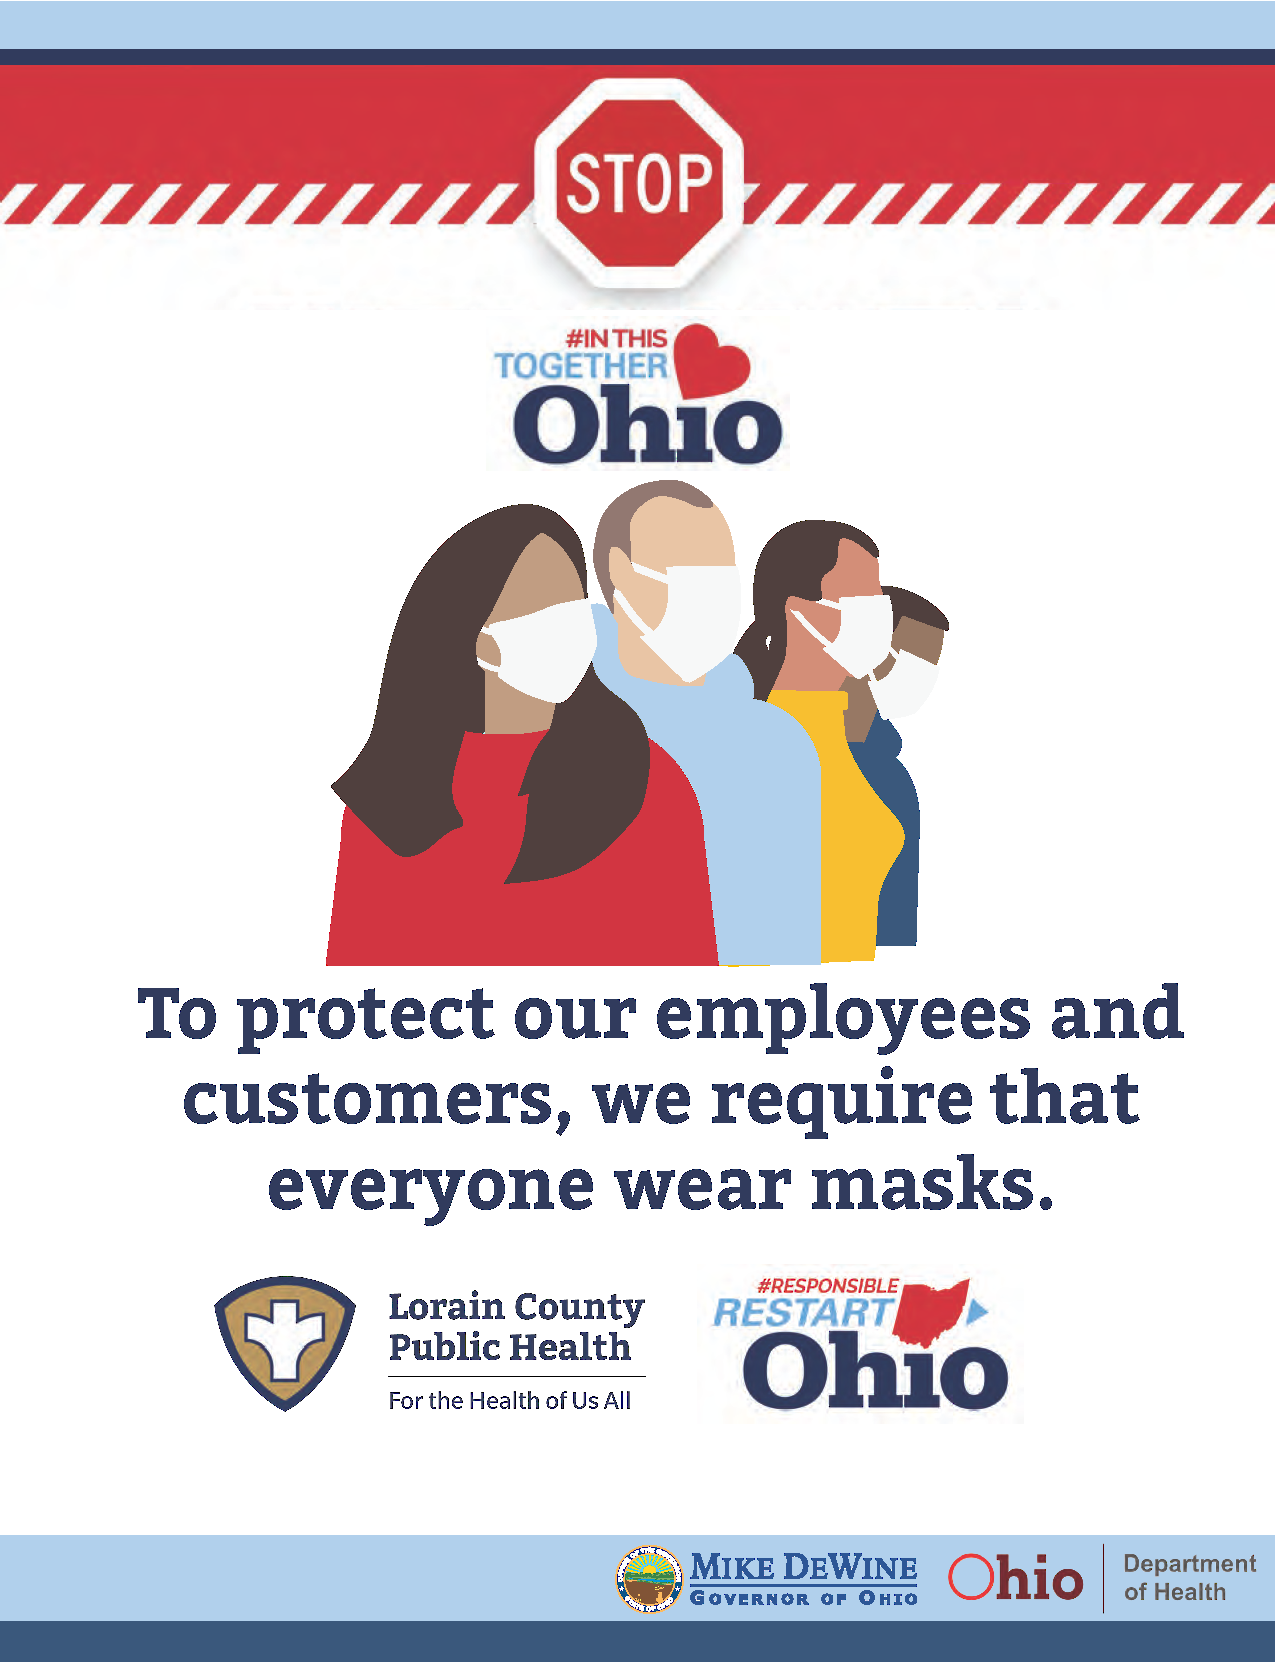 A cartoon image of people wearing masks with the text "To protect our employees and customers, we require that everyone wear masks"